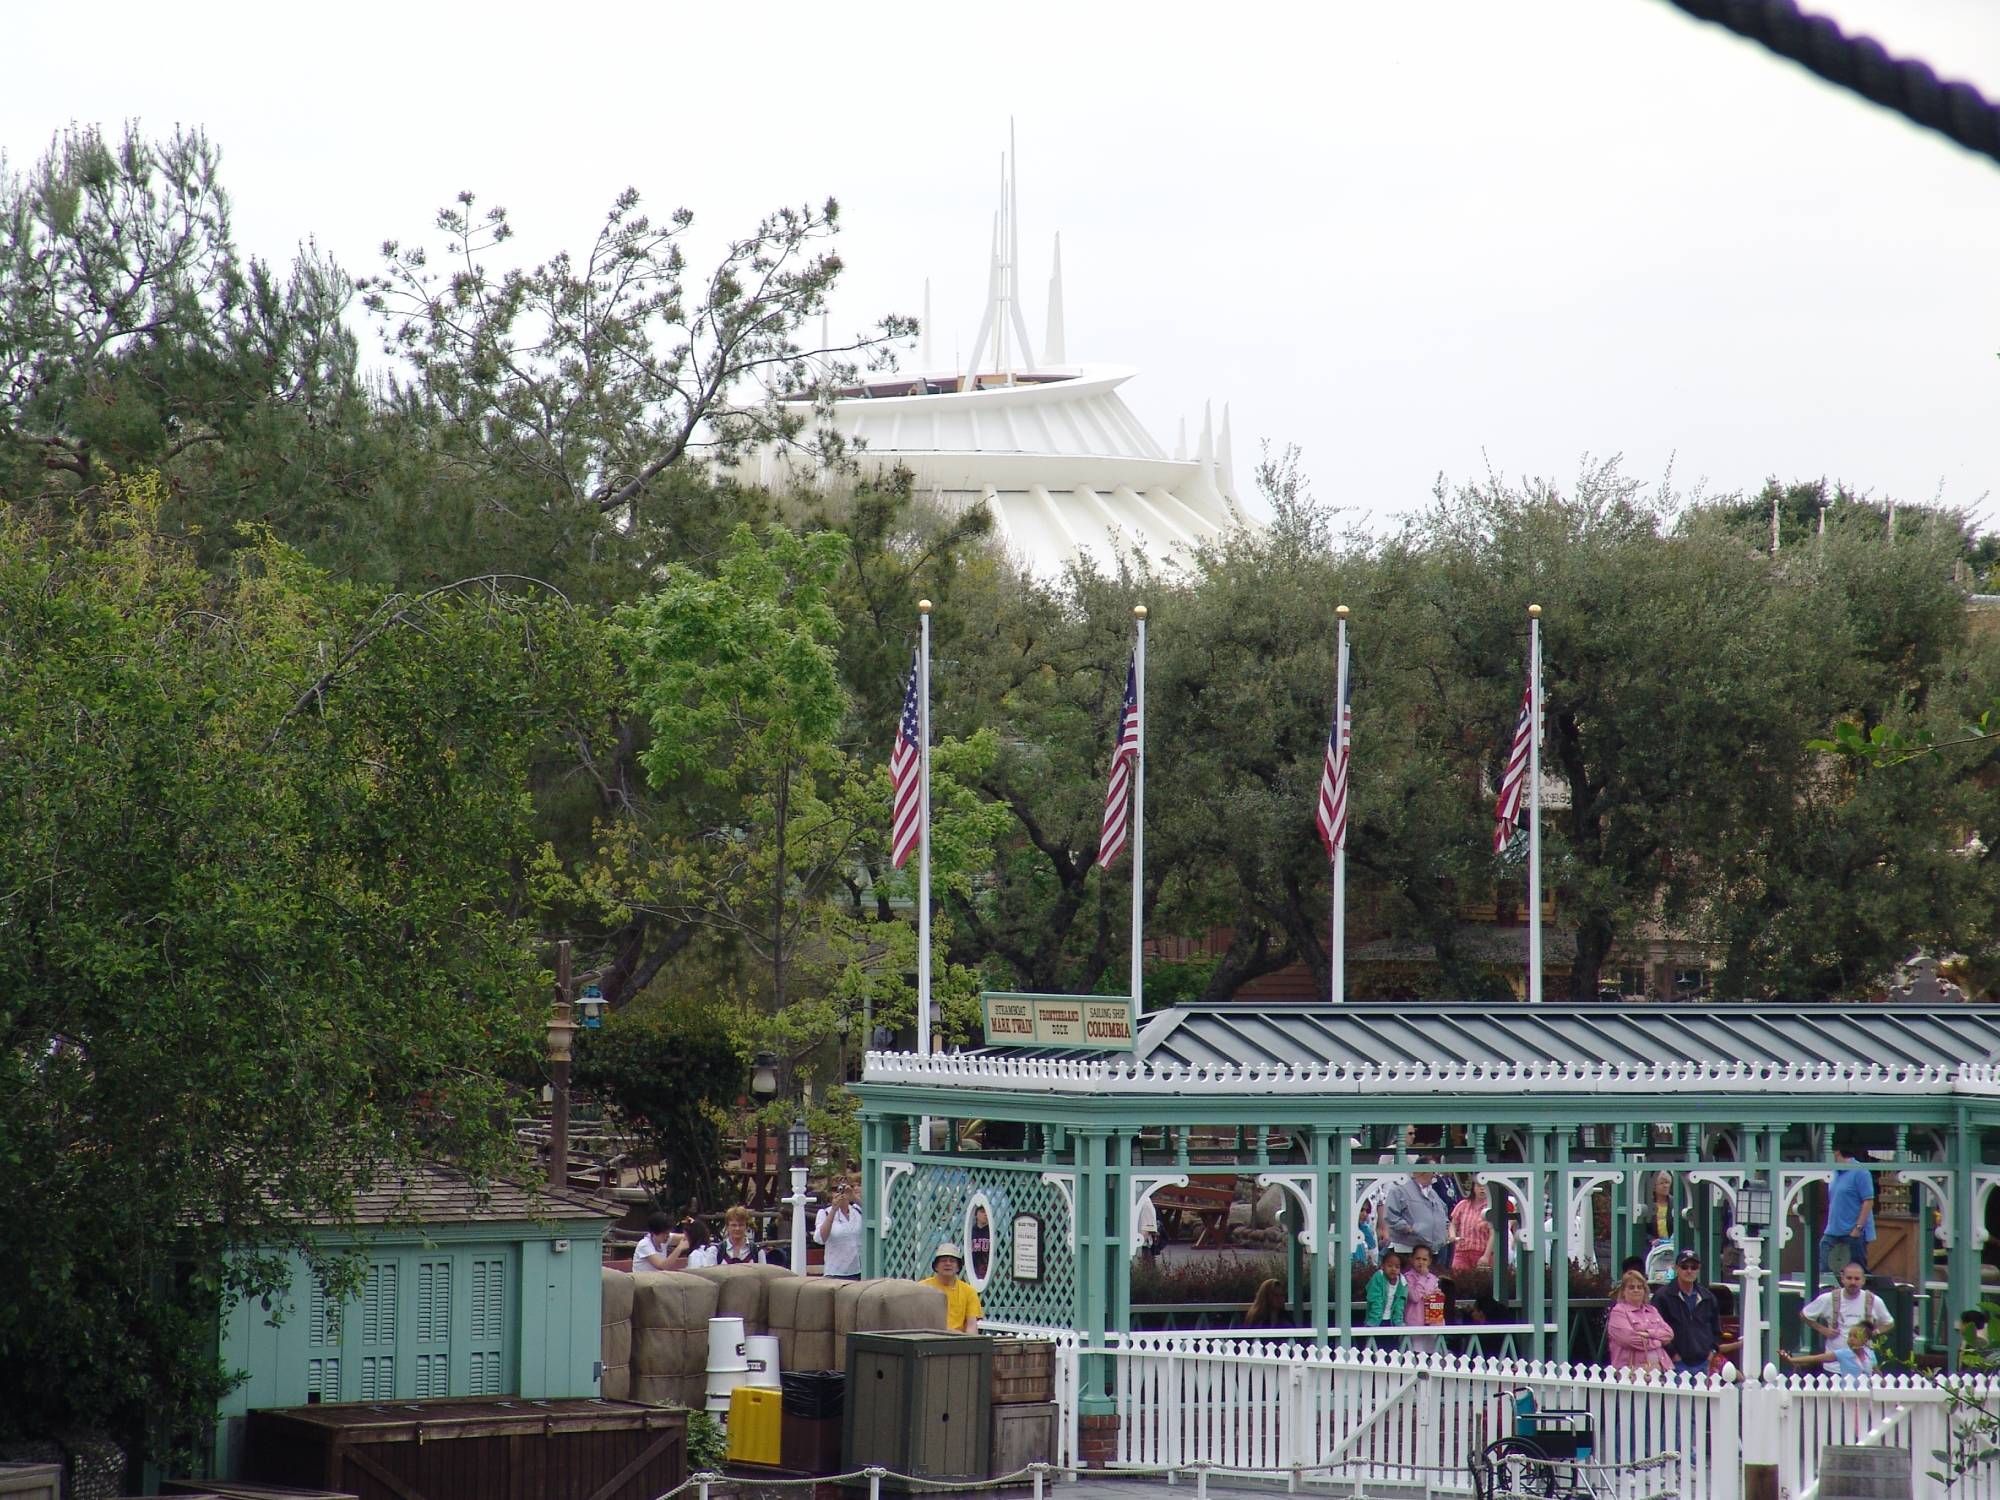 Disneyland - looking over to Space Mountain